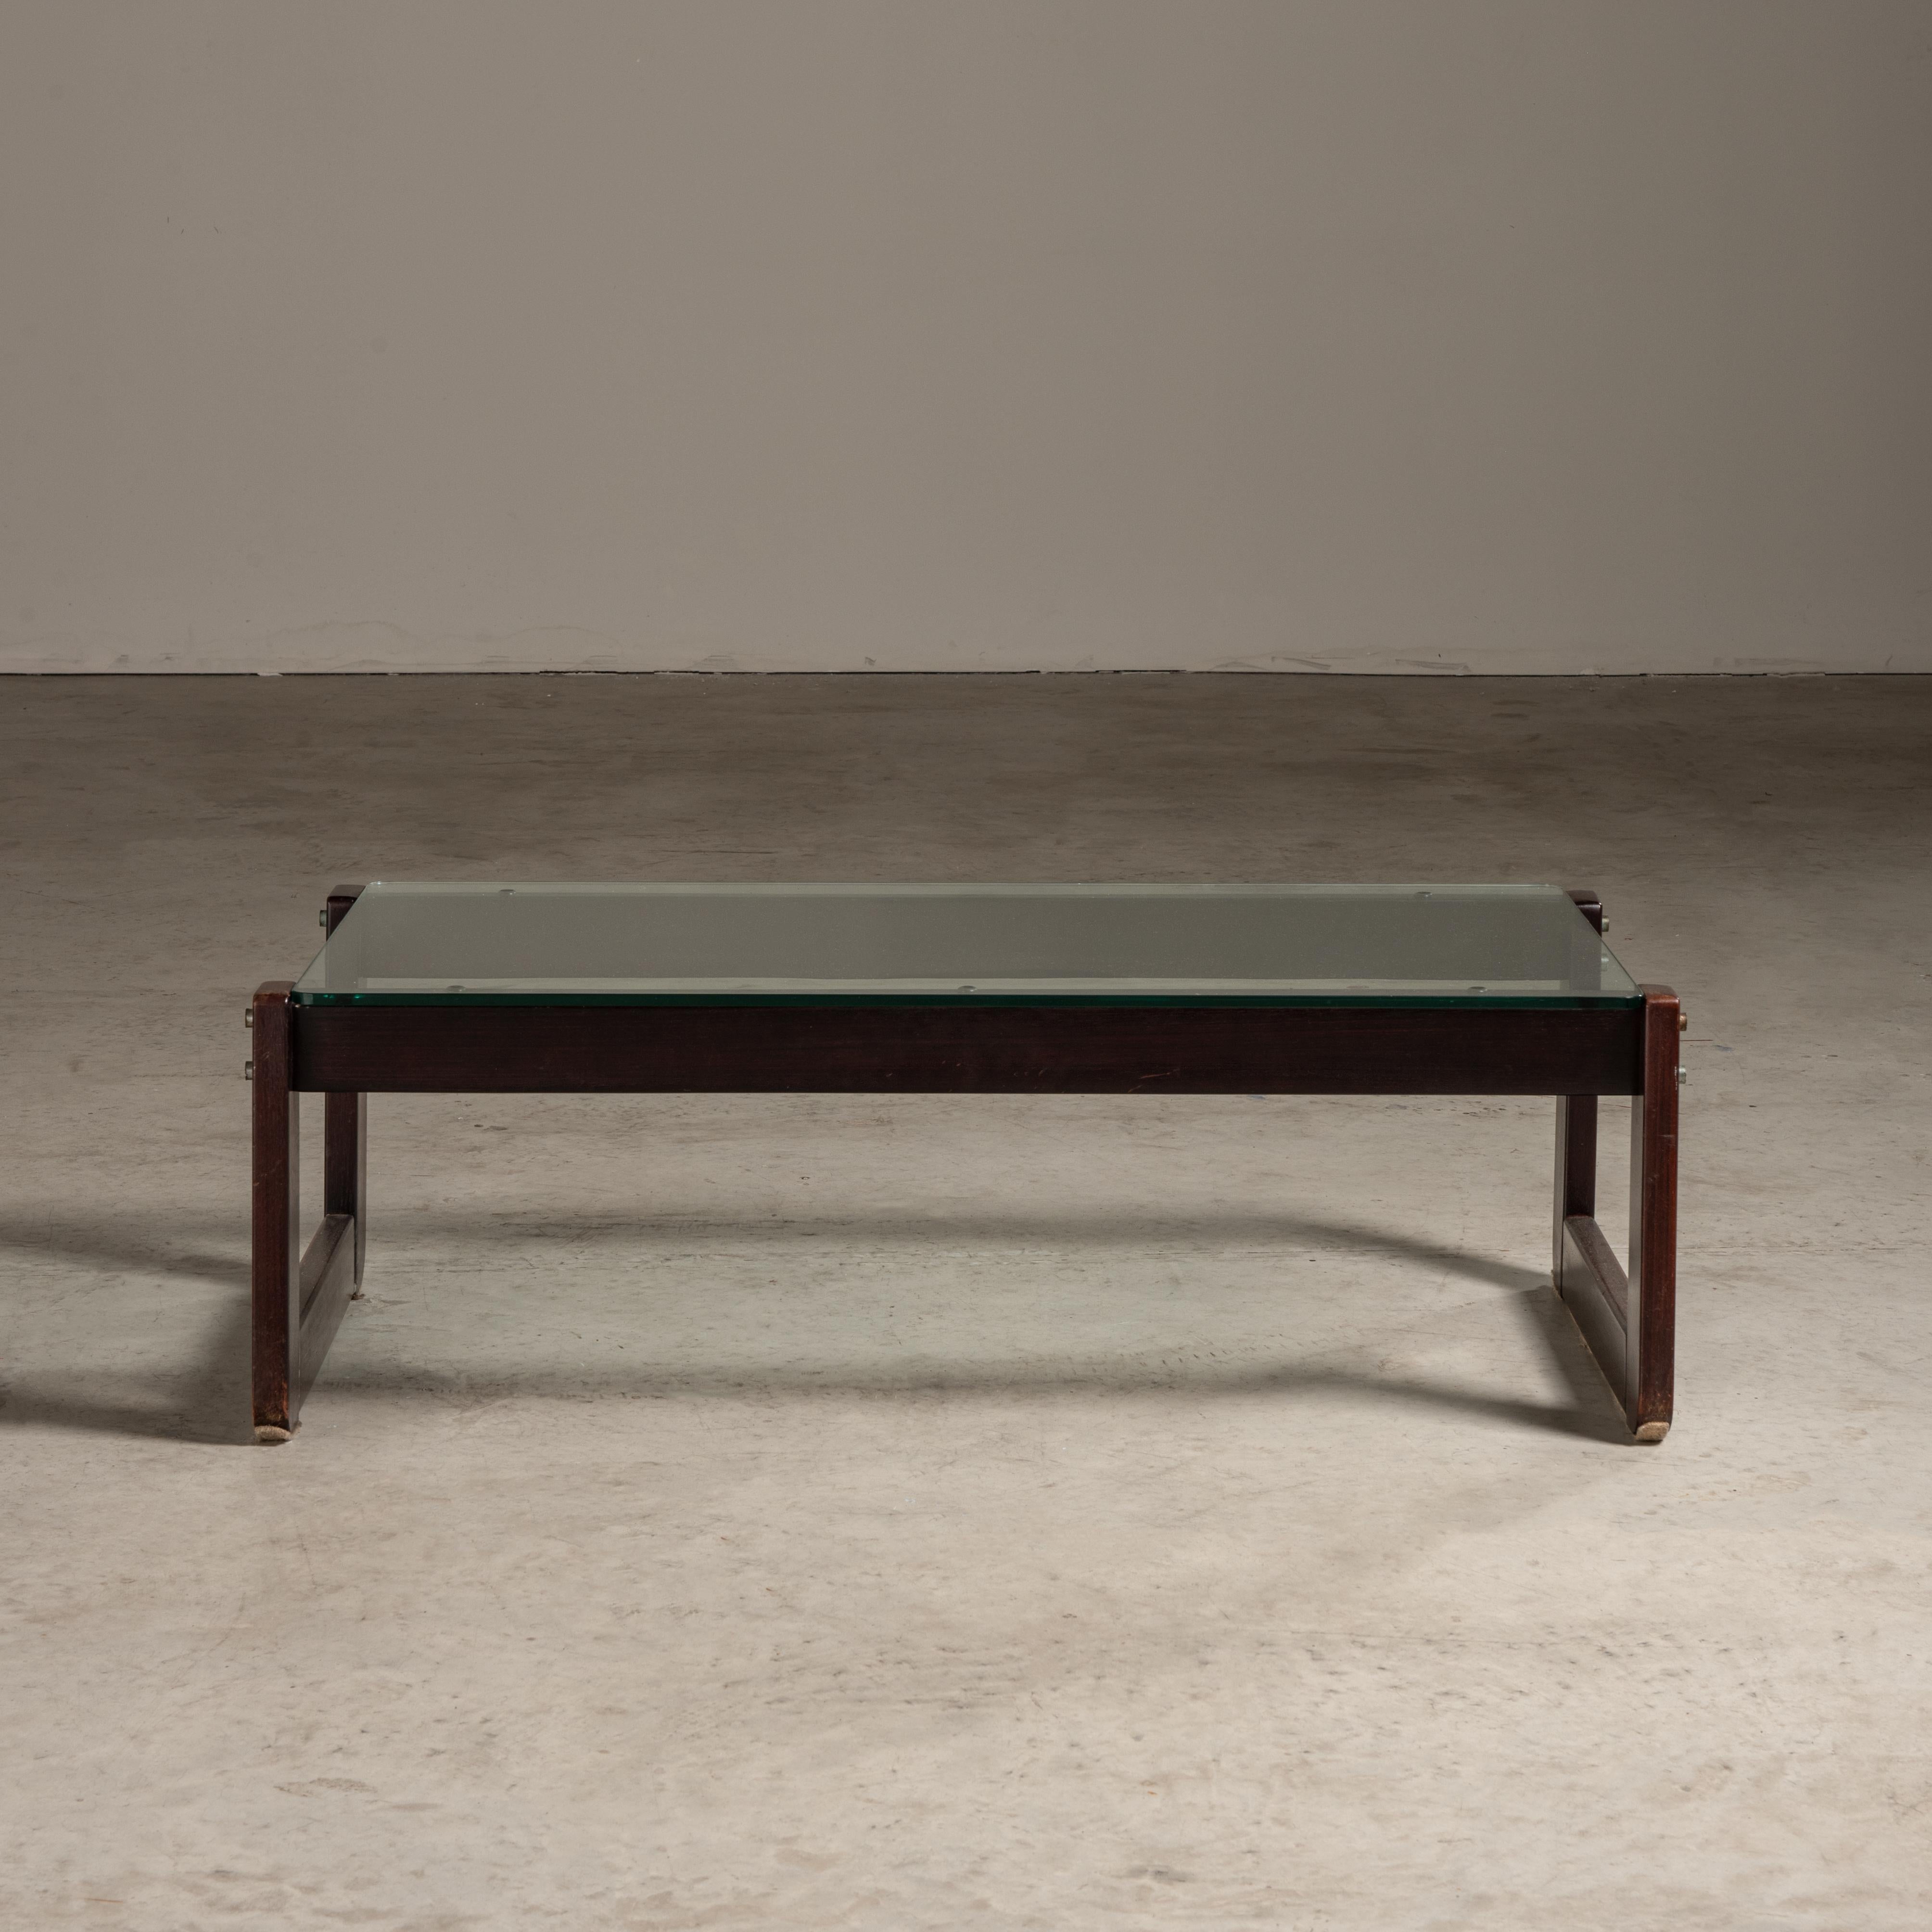 20th Century 'MP-105' Coffee Table, by Percival Lafer, Brazilian Mid-Century Modern For Sale